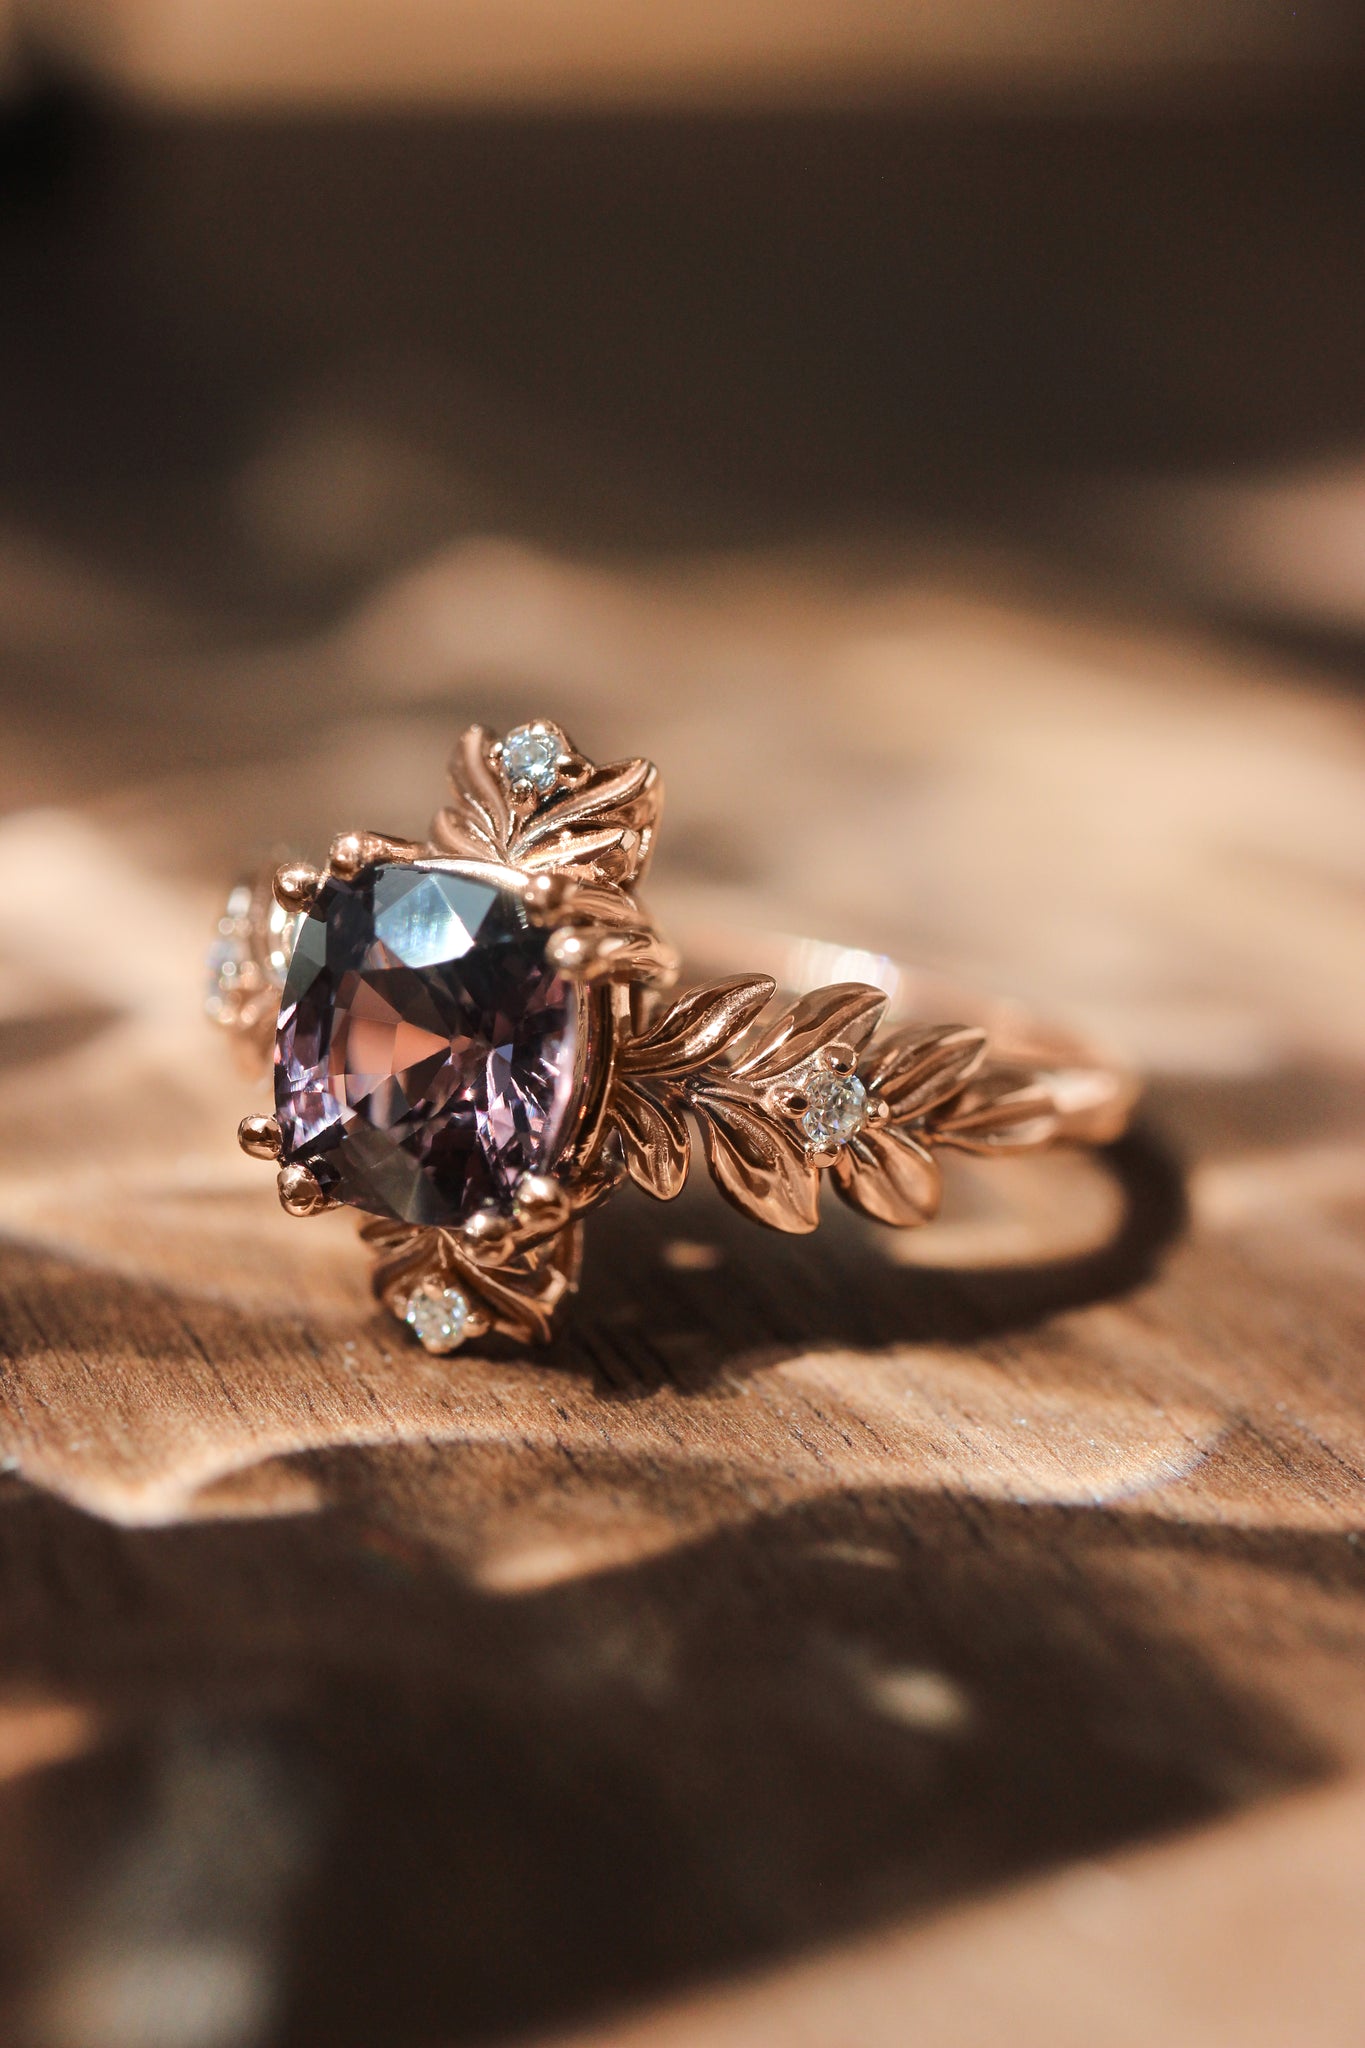 Purple spinel ring with diamonds, leaf engagement ring - Eden Garden Jewelry™